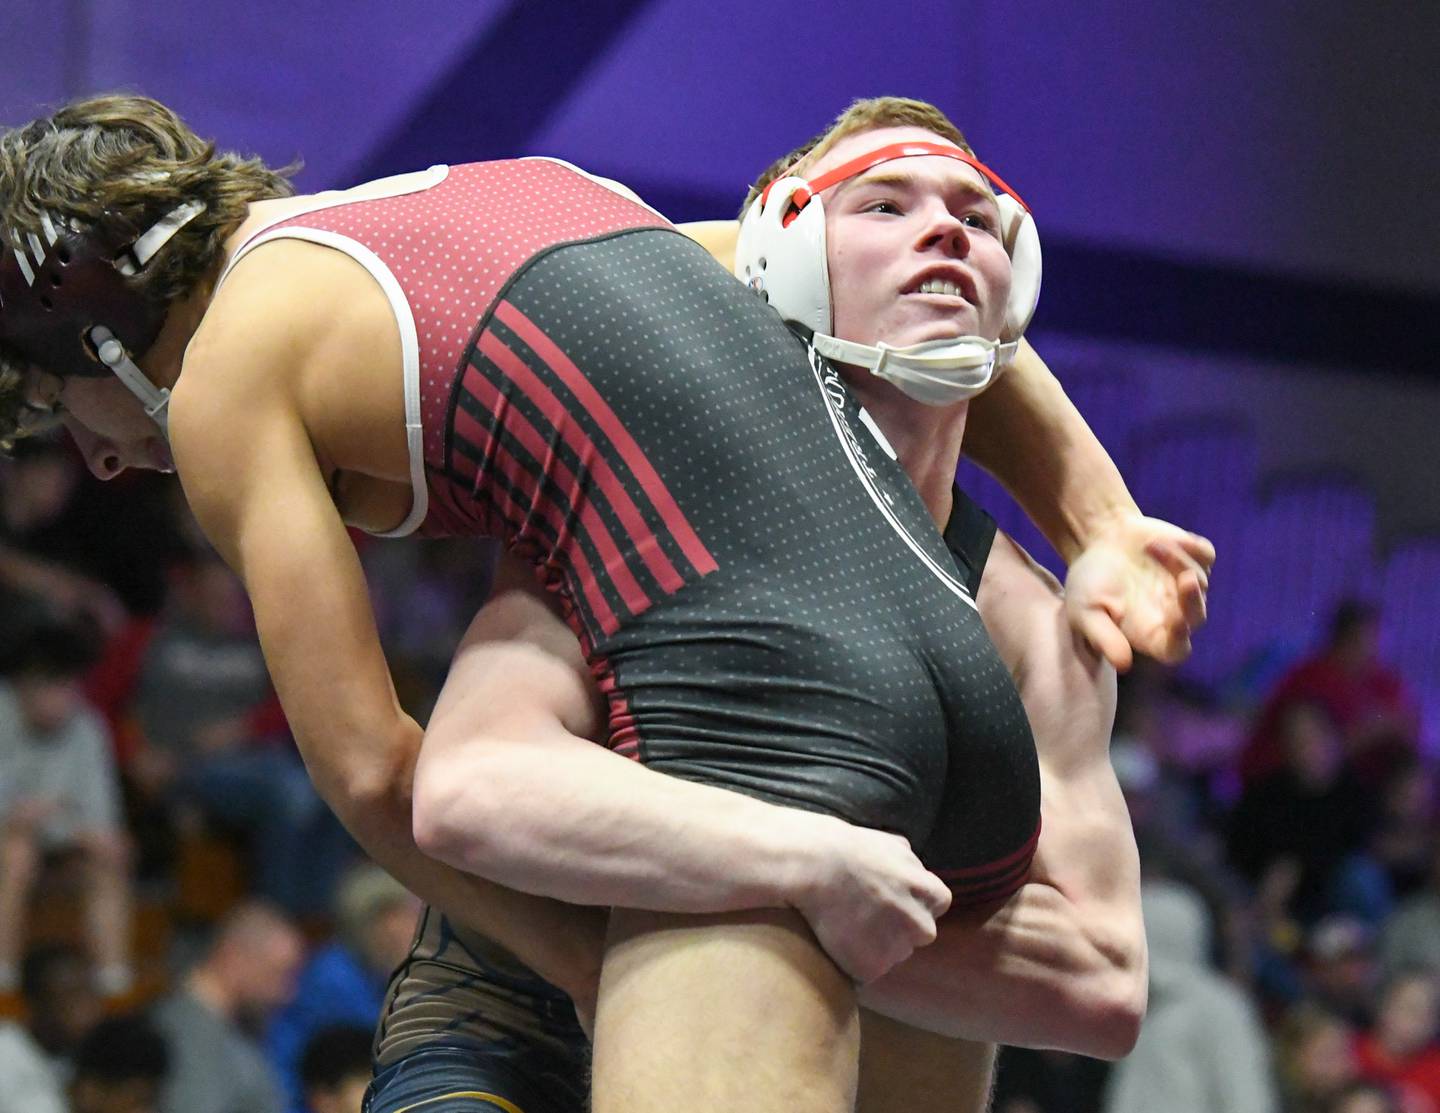 Yorkville Christian Noah Dial wrestles during the 1322 weight class during the championship match Saturday Dec. 10th where he took first at the Plano Reaper wrestling classic held at Plano High School.